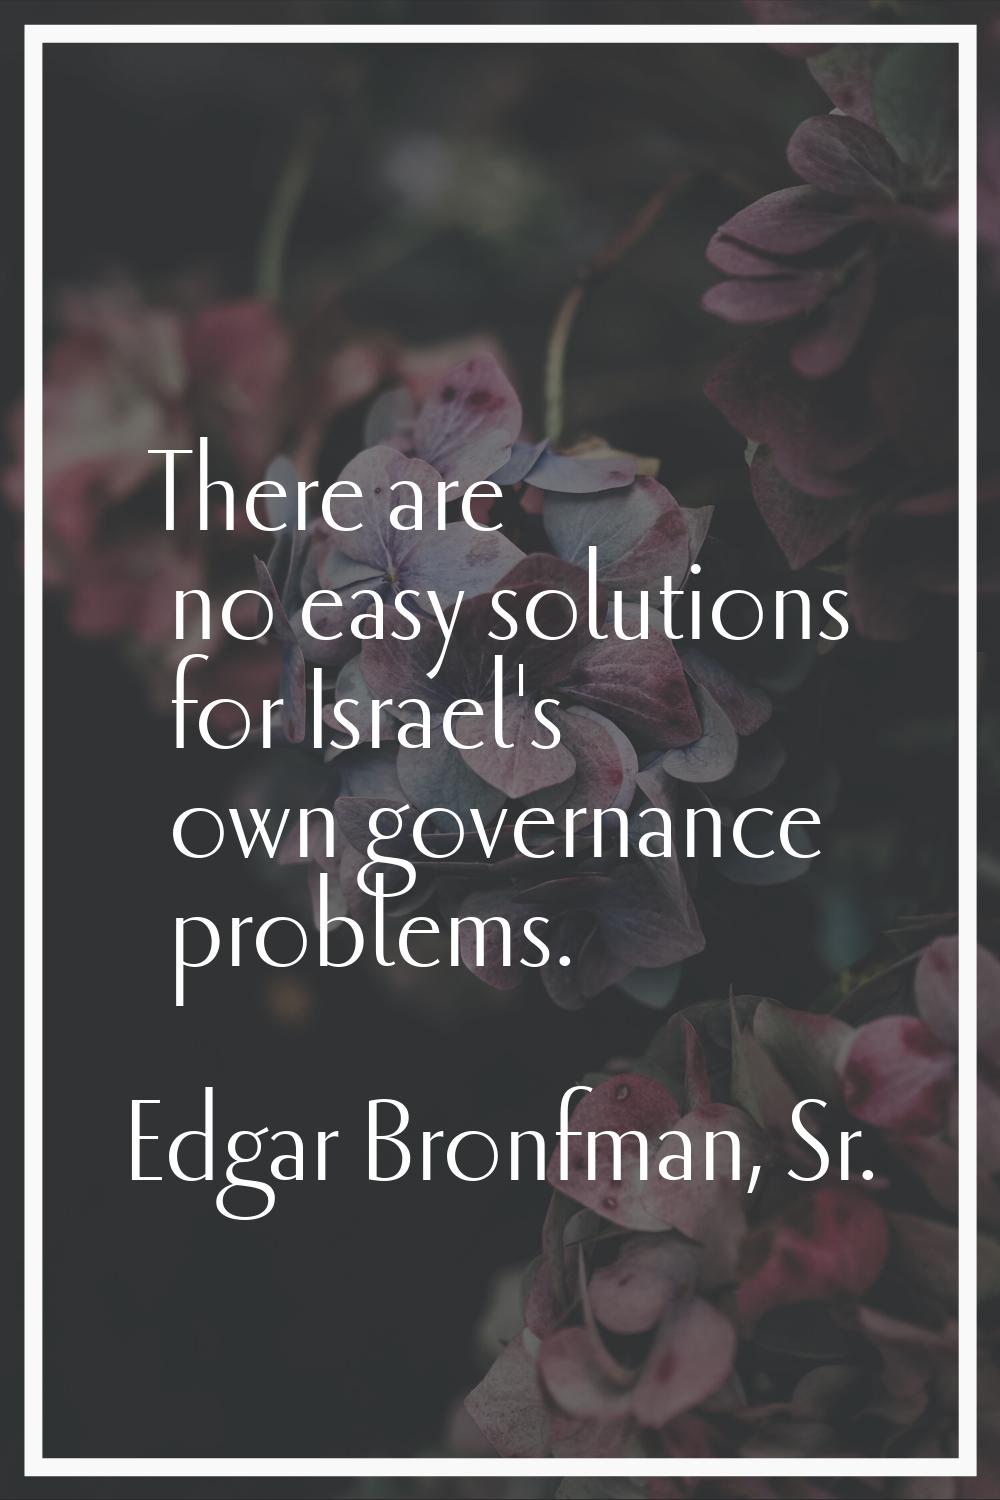 There are no easy solutions for Israel's own governance problems.